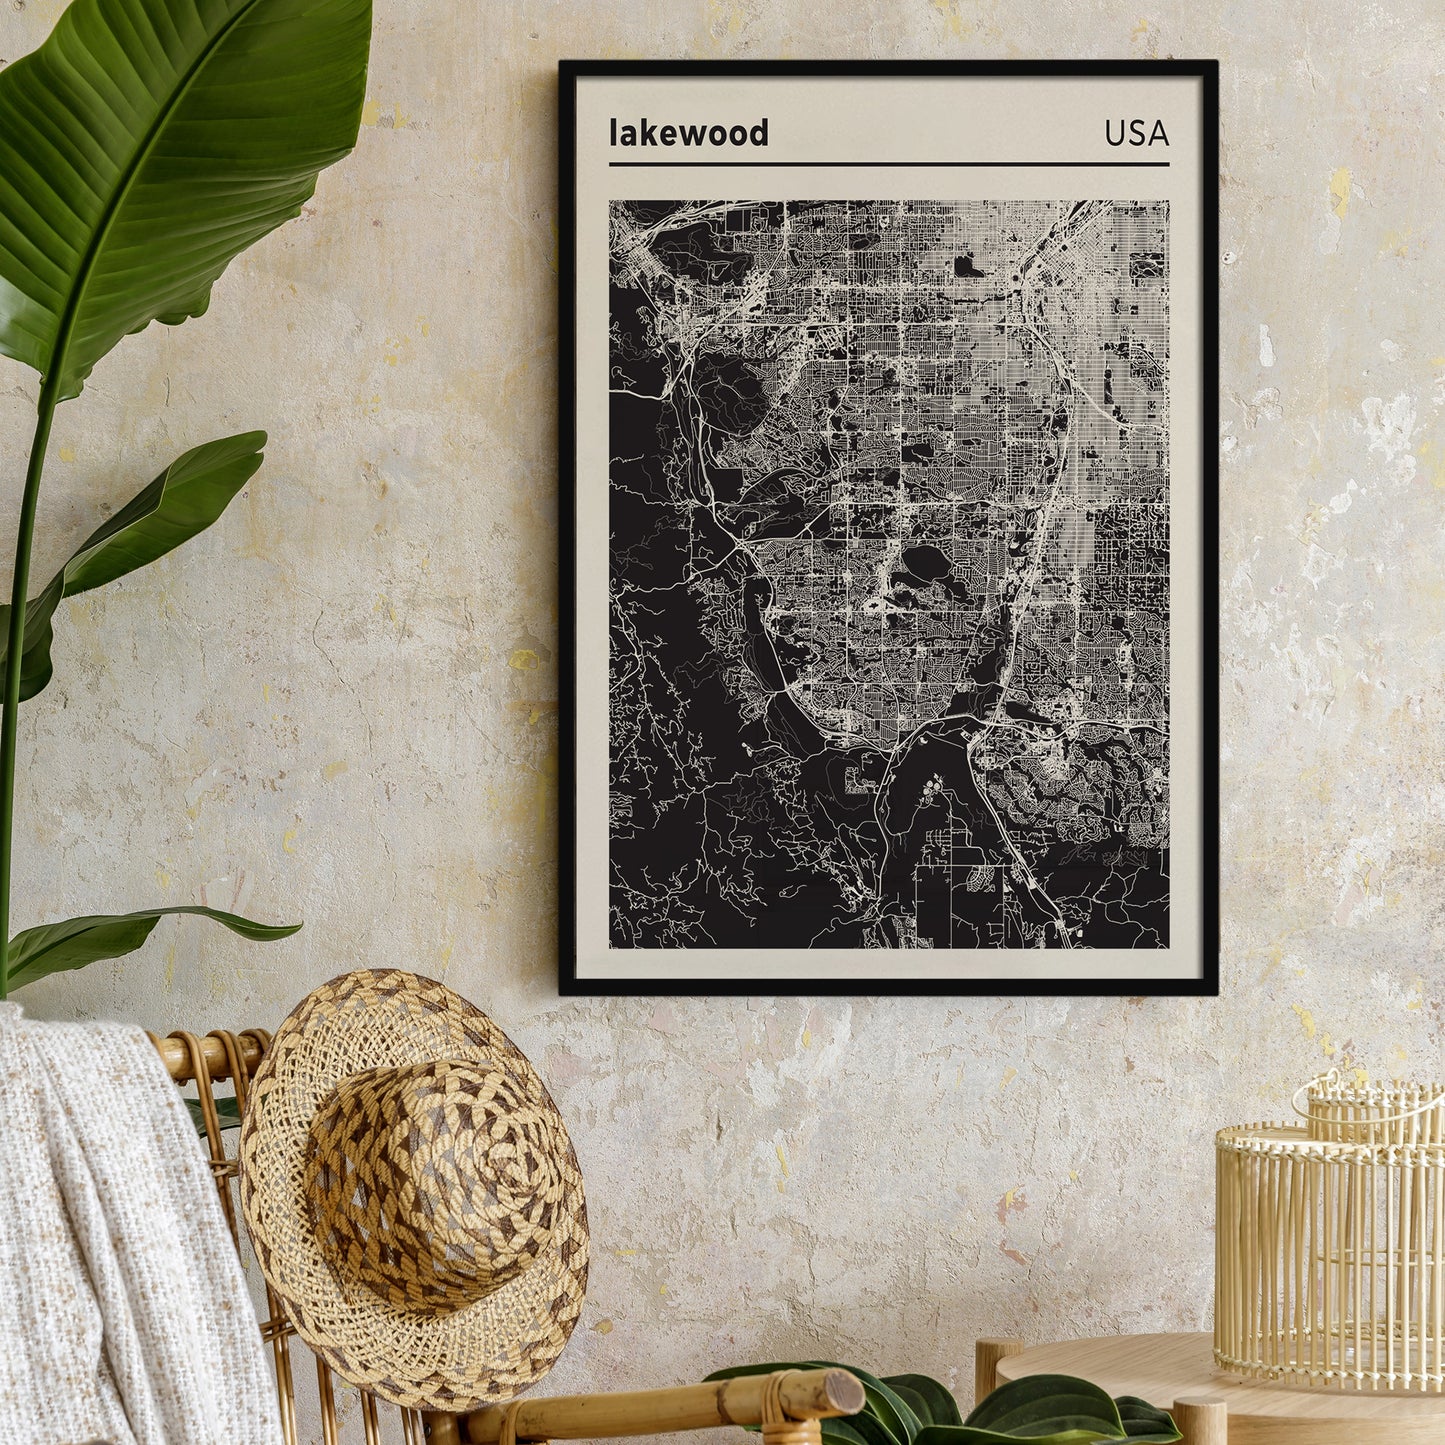 Lakewood, USA - black and white city map poster